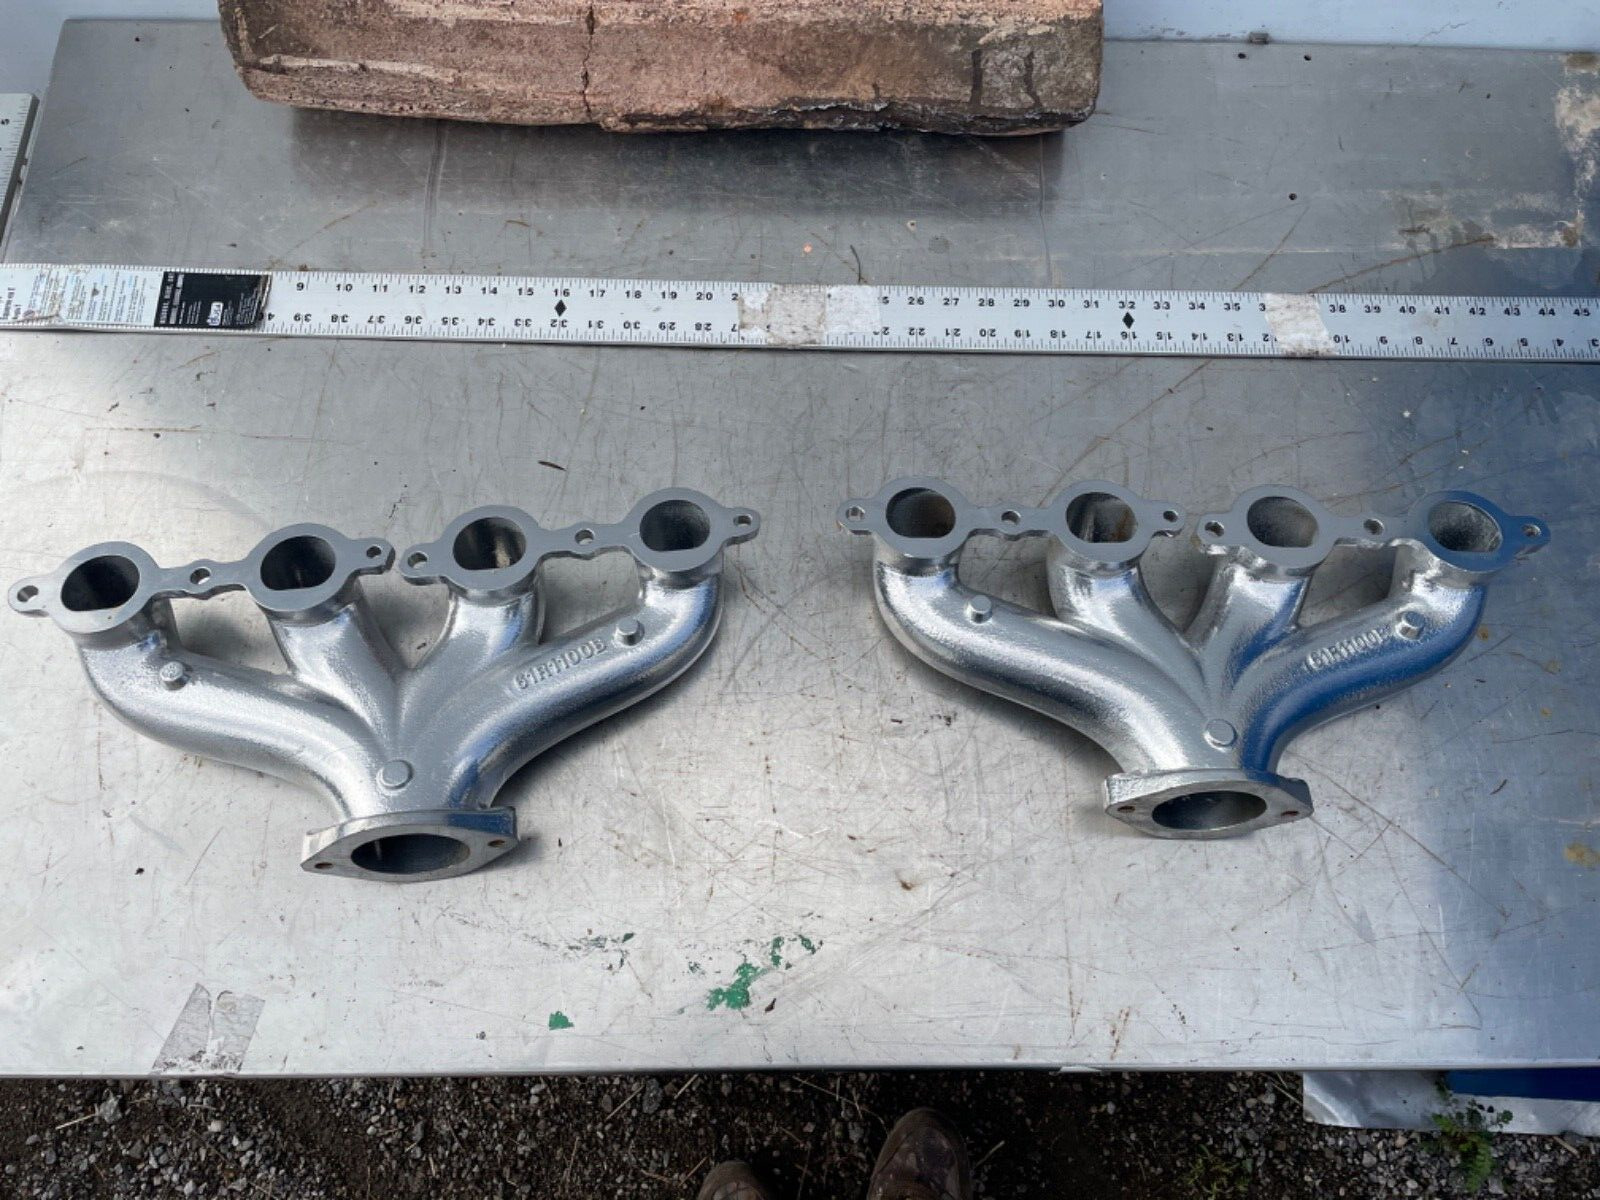 Hooker 61R1100B Exhaust Manifolds - No gaskets are included, just what you see